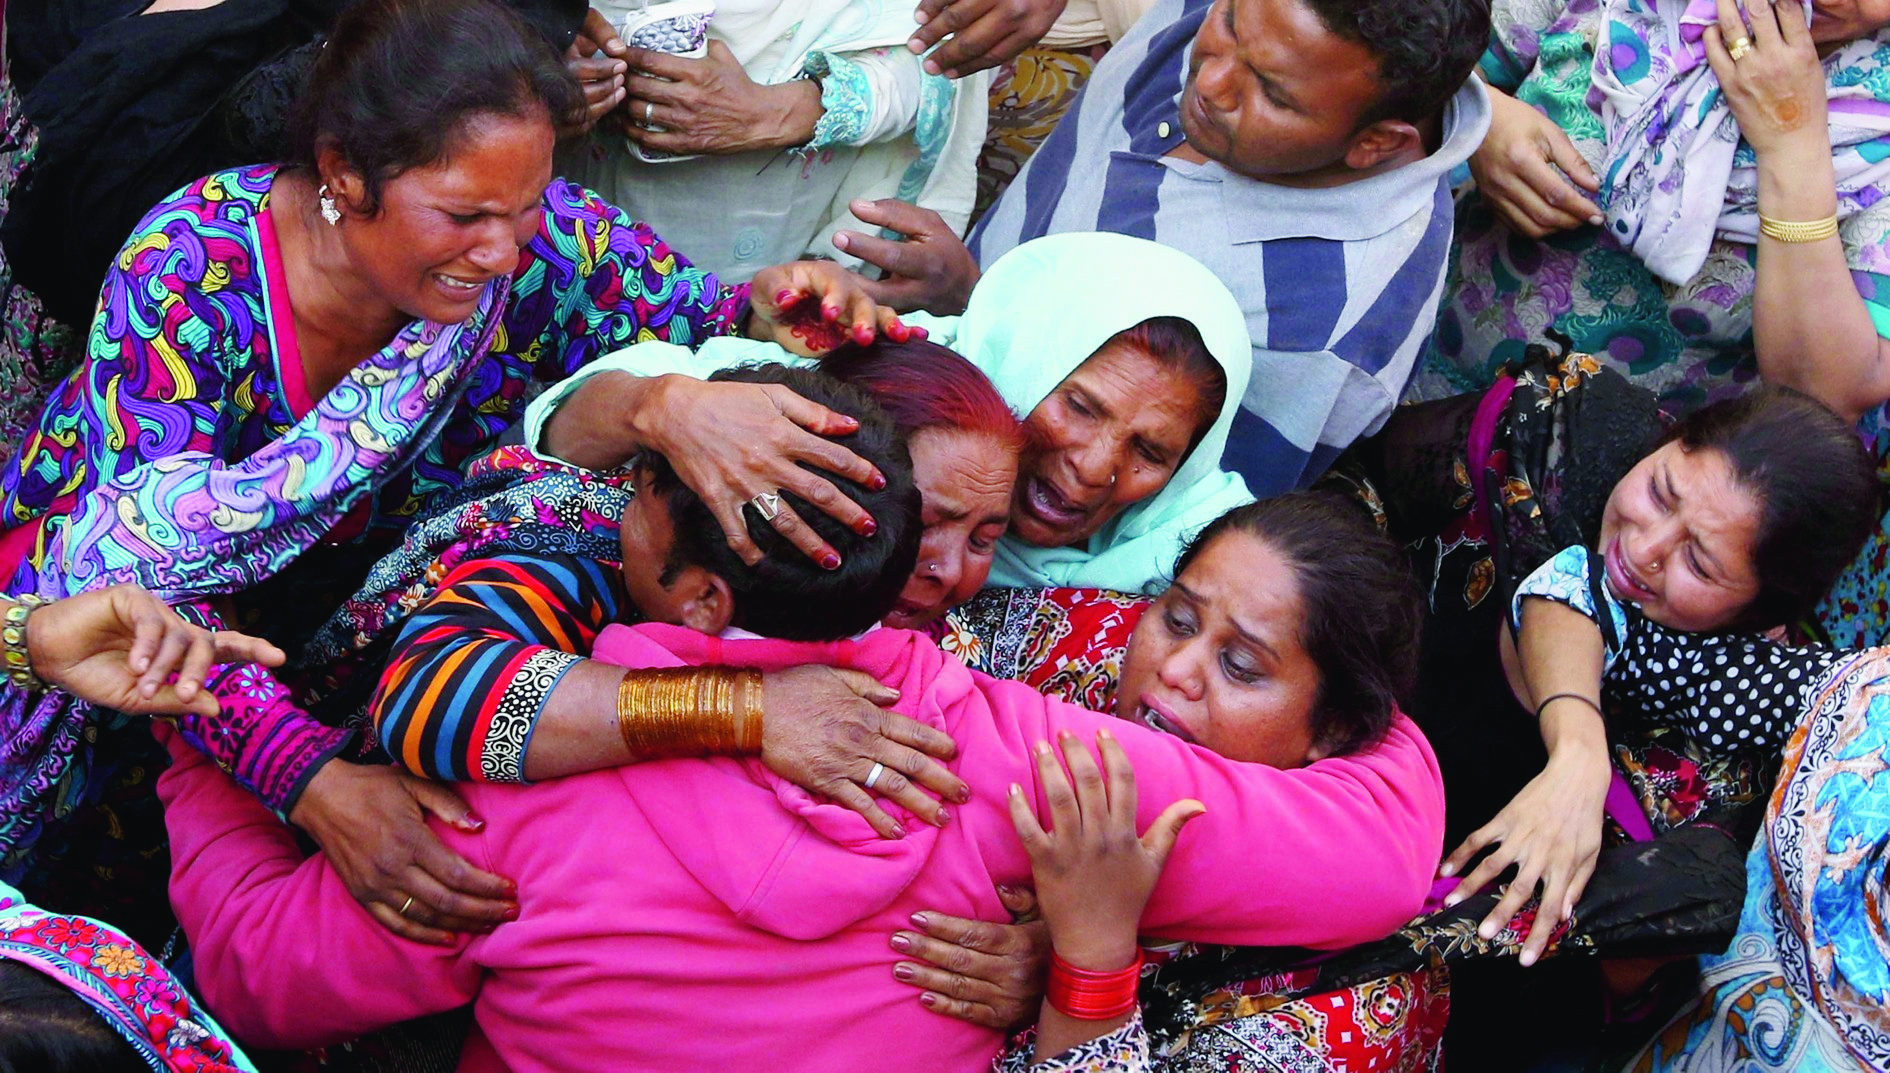 epa05233361 People cry during the funeral of their loved ones a day after a suicide bomb attack at a park, in Lahore, Pakistan, 28 March 2016. At least 70 people, including women and children, were killed in a suicide bomb attack on 27 March that targeted a public park in Lahore. Some 340 people were reportedly injured in the attack claimed by a splinter group of the Pakistani Taliban.  EPA/RAHAT DAR PAKISTAN SUICIDE BOMB BLAST AFTERMATH